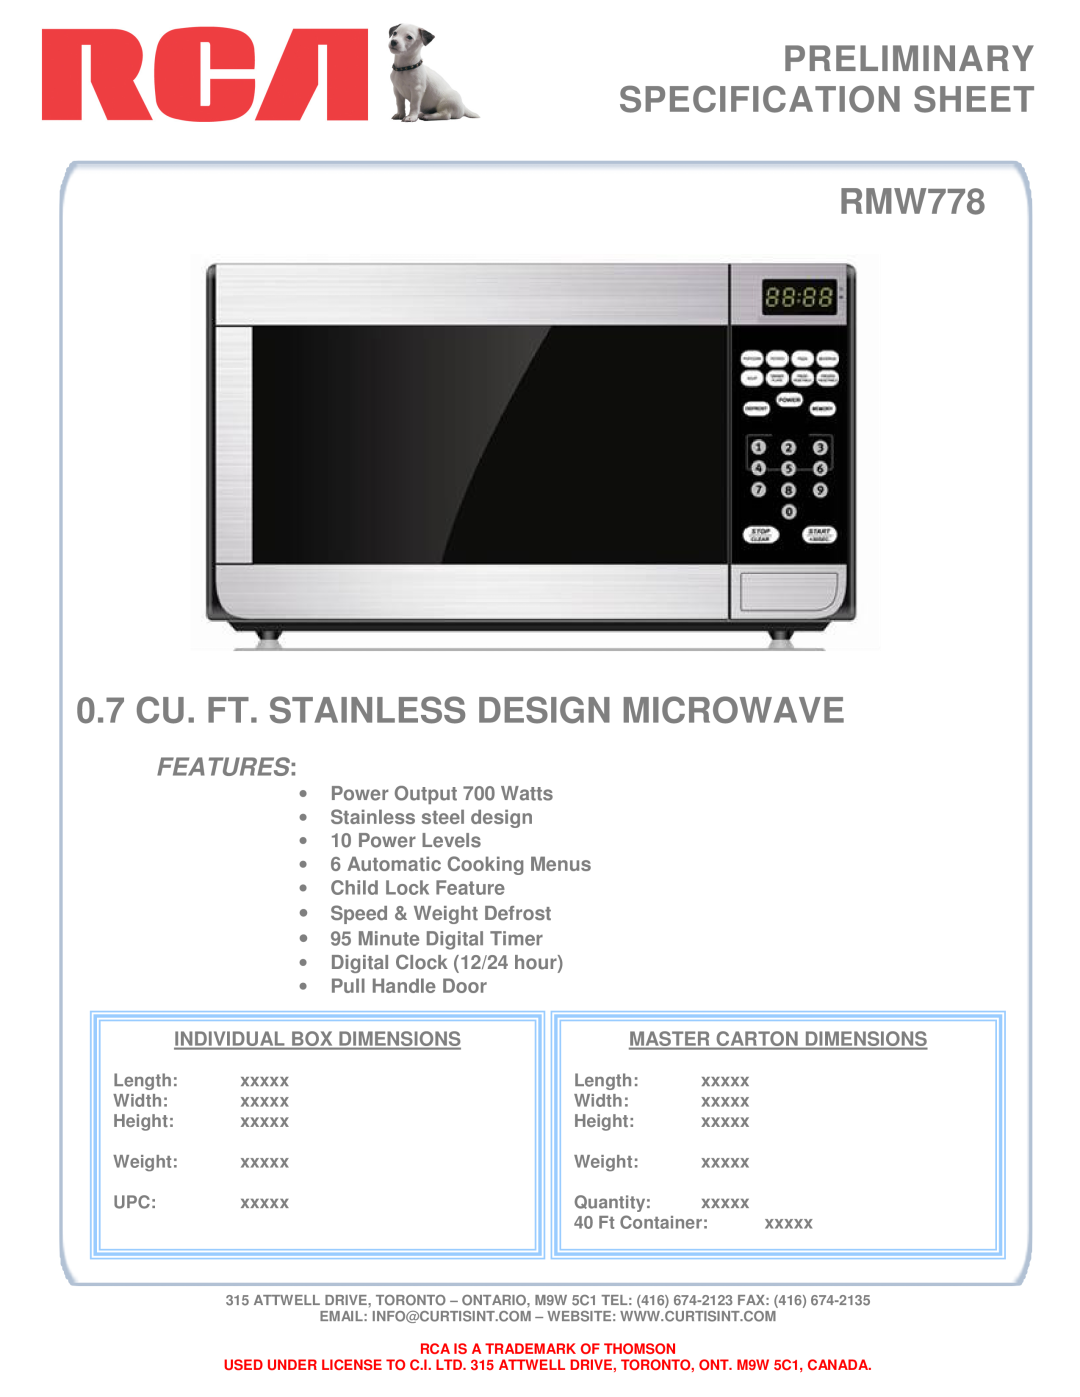 RCA specifications PRELIMINARY SPECIFICATION SHEET RMW778, 0.7 CU. FT. STAINLESS DESIGN MICROWAVE, Features 